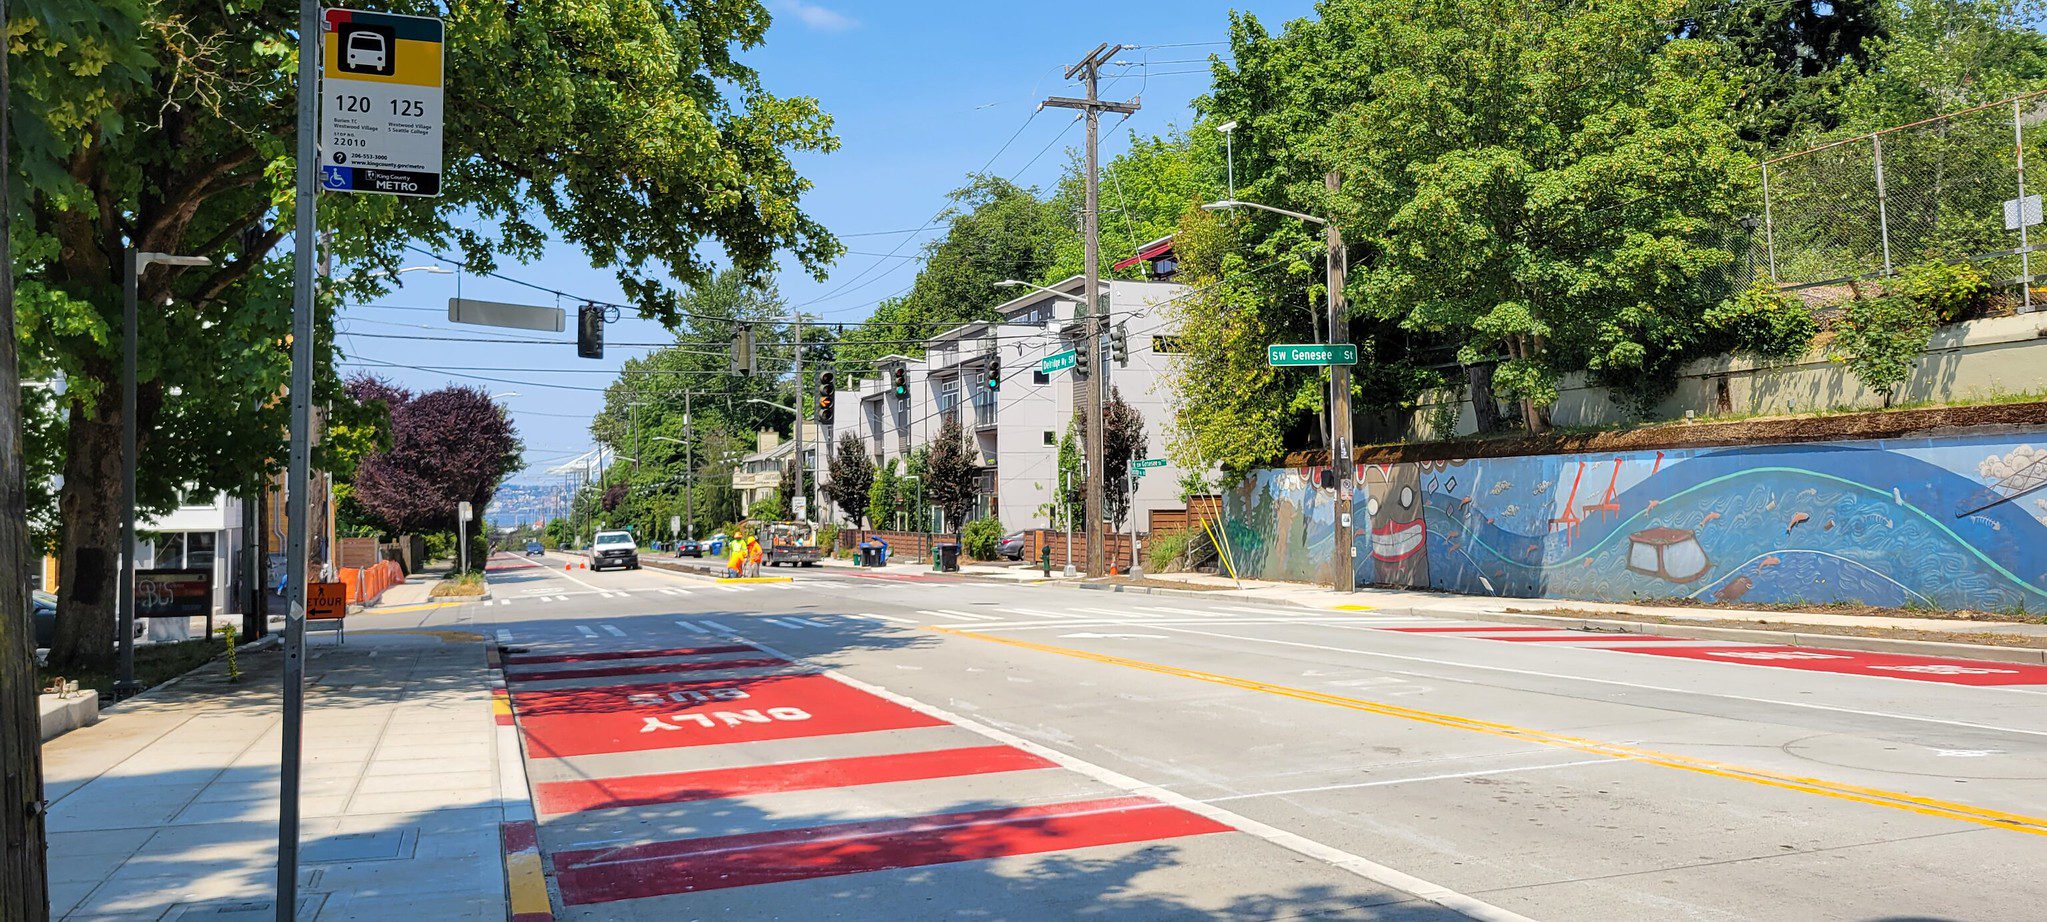 Example of a bus-only lane on Delridge Way SW. The bus-only lane is painted red, with trees and traffic signs shown in the background.